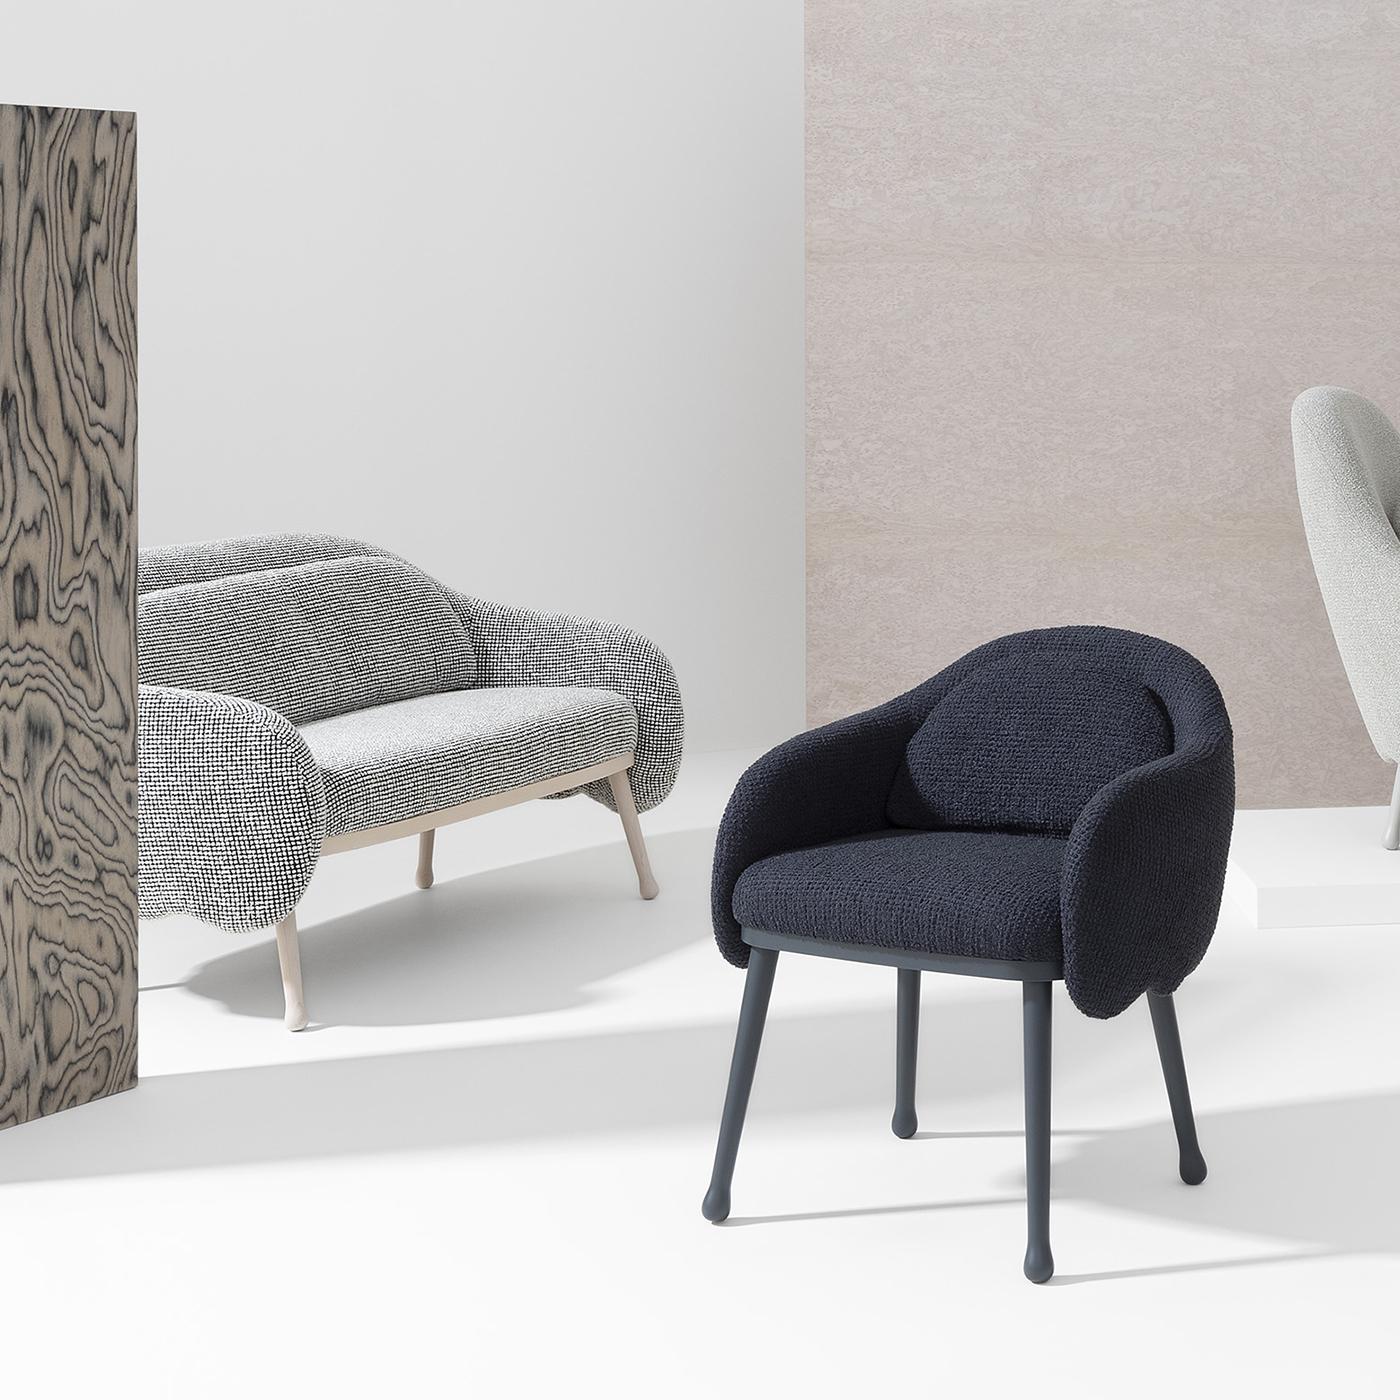 Exuding comfort and relaxation, this modern armchair is a superb design by Cristina Celestino. Resting on a solid beechwood structure with four black-lacquered legs with round feet and felt pads, the seat is softly padded and features a black fabric